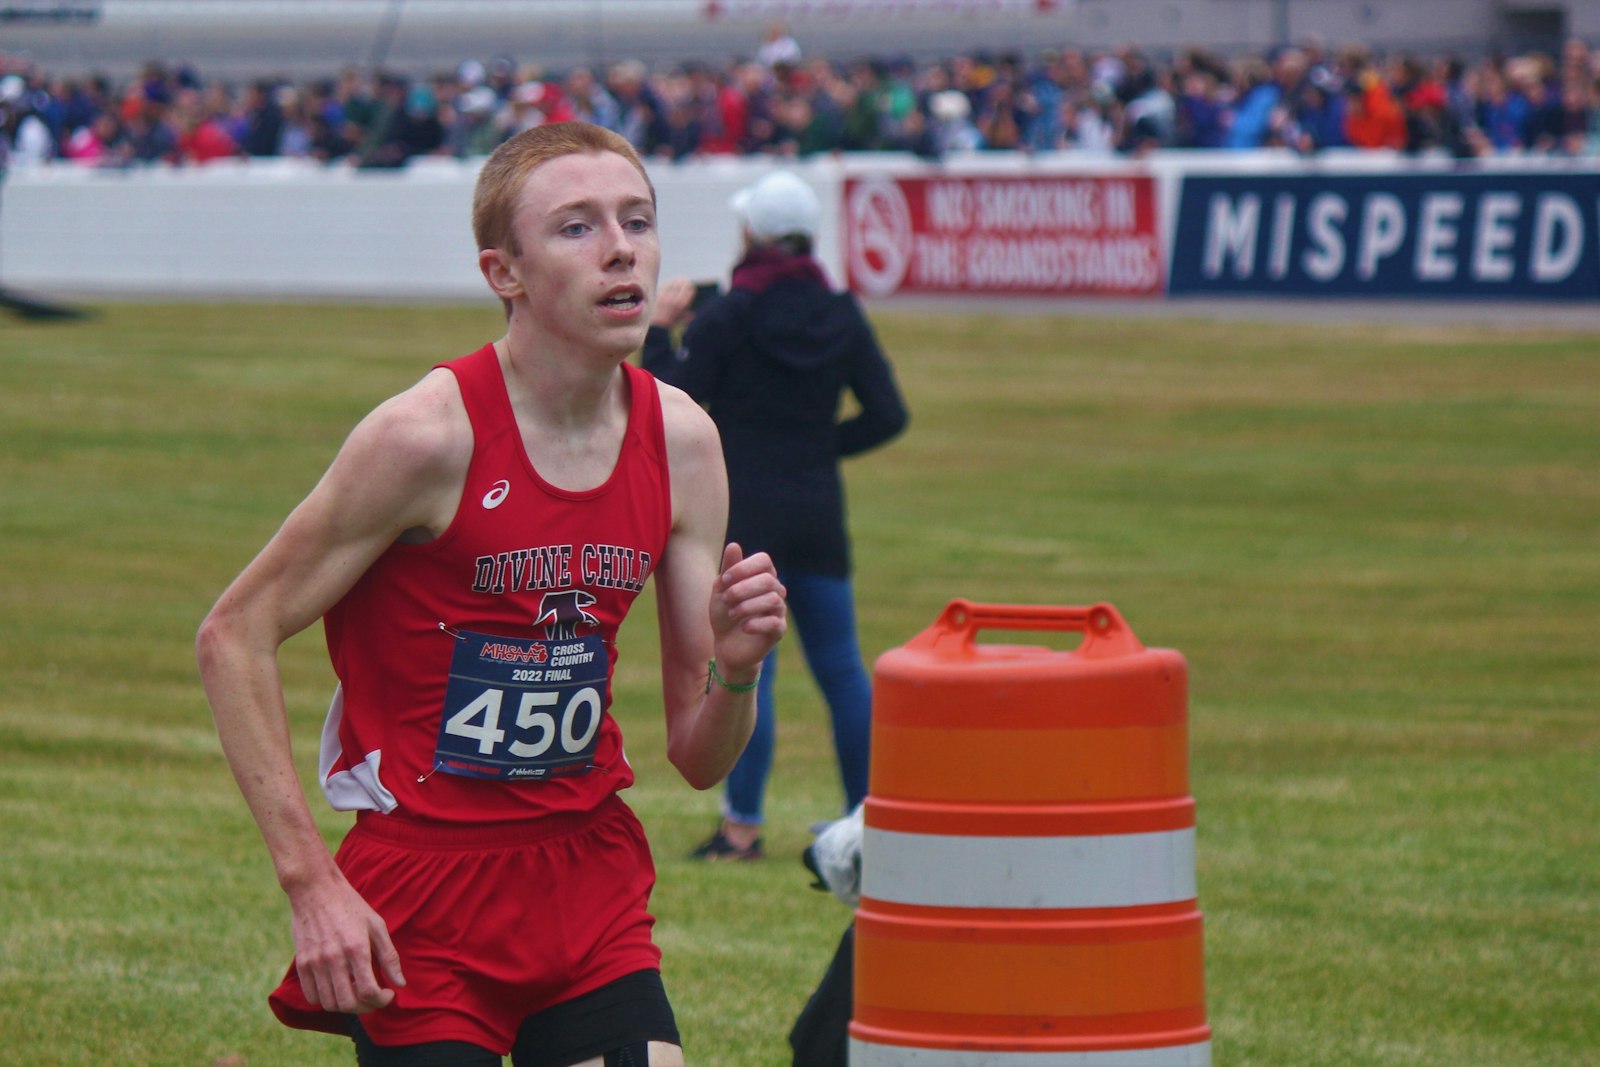 The top finisher from a local Catholic high school was Dearborn Divine Child senior Michael Hegarty, who placed fourth in the Division 2 final race, helping the Falcons achieve a seventh-place team finish. (Wright Wilson | Special to Detroit Catholic)